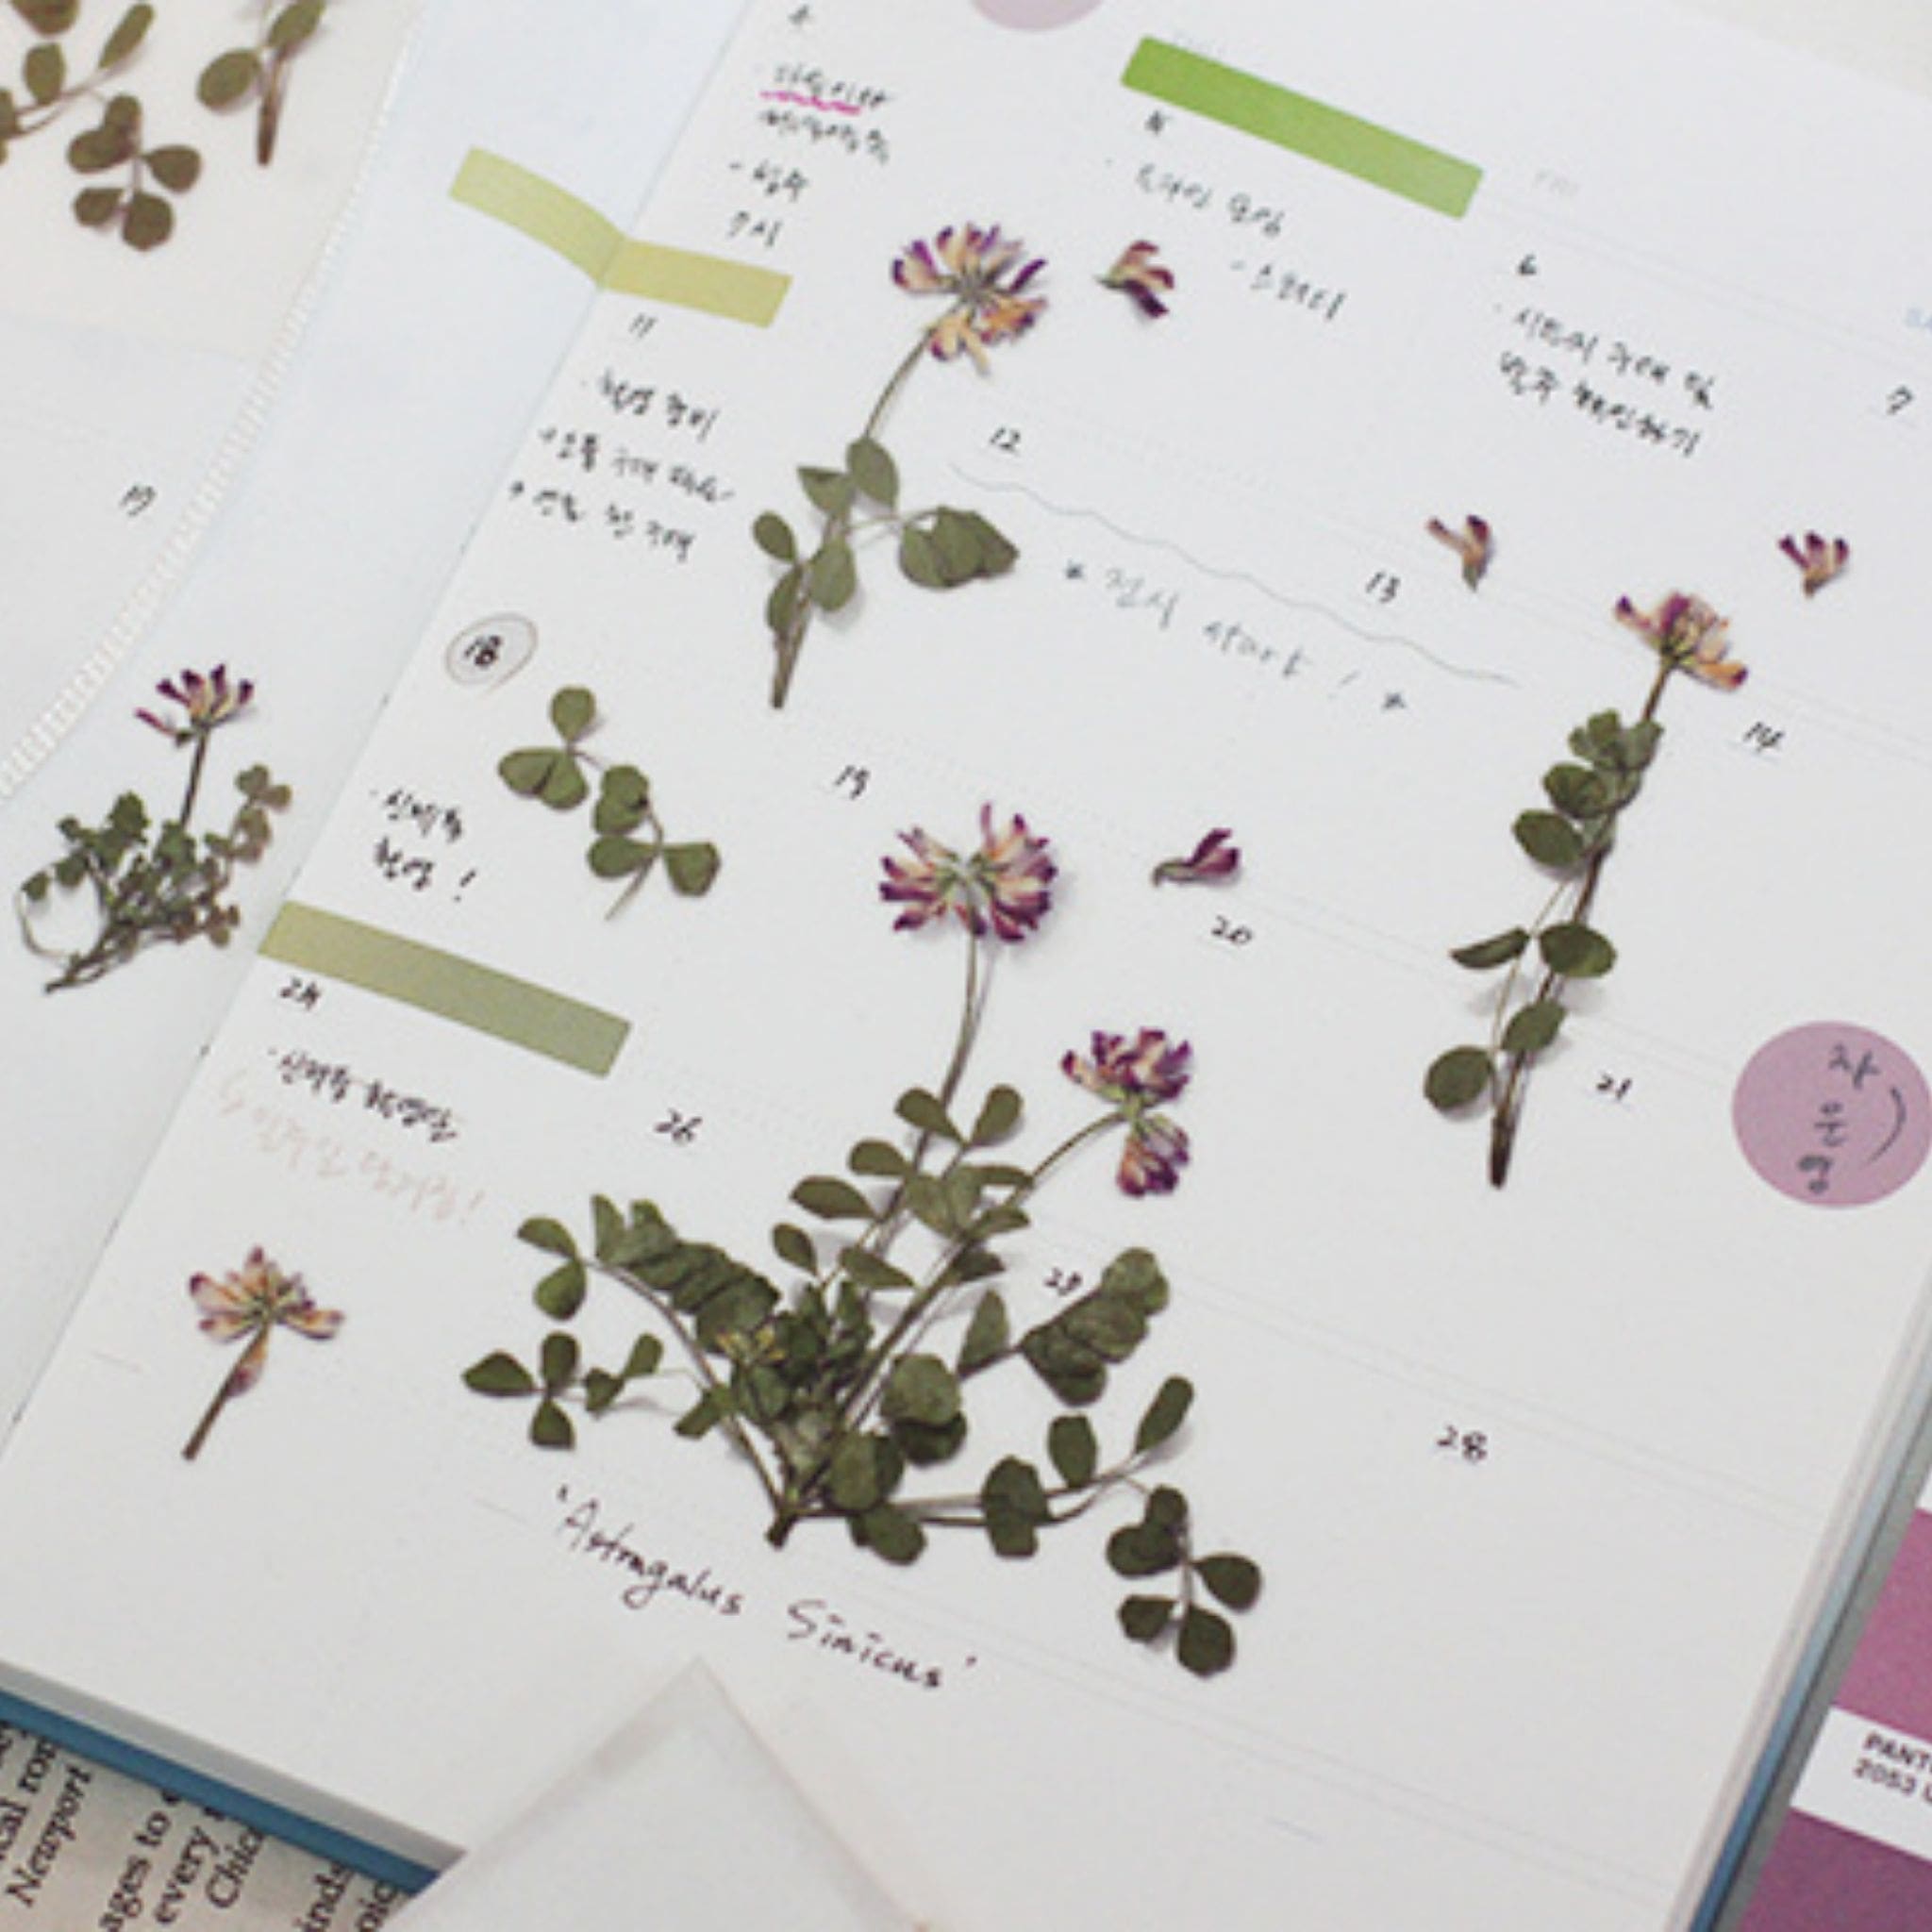 Appree Astragalus Sinicus Pressed Flower Stickers in the notebook - Paper Kooka